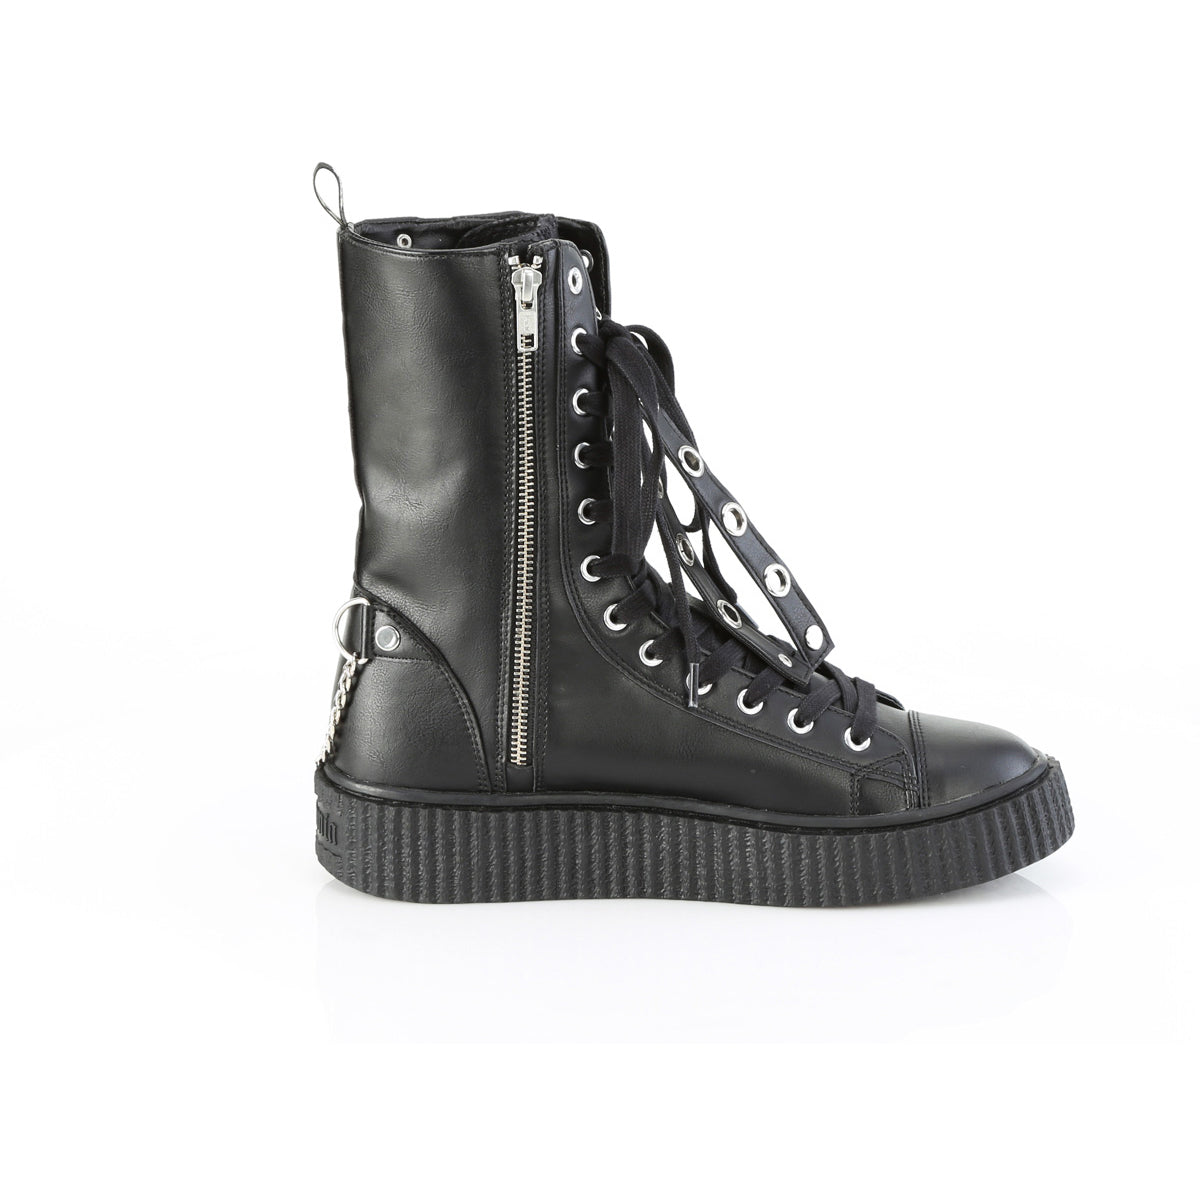 1 1/2"Pf Round Toe Lace Up Front Calf High Creeper Sneaker Pleaser Demonia SNEEKER/325